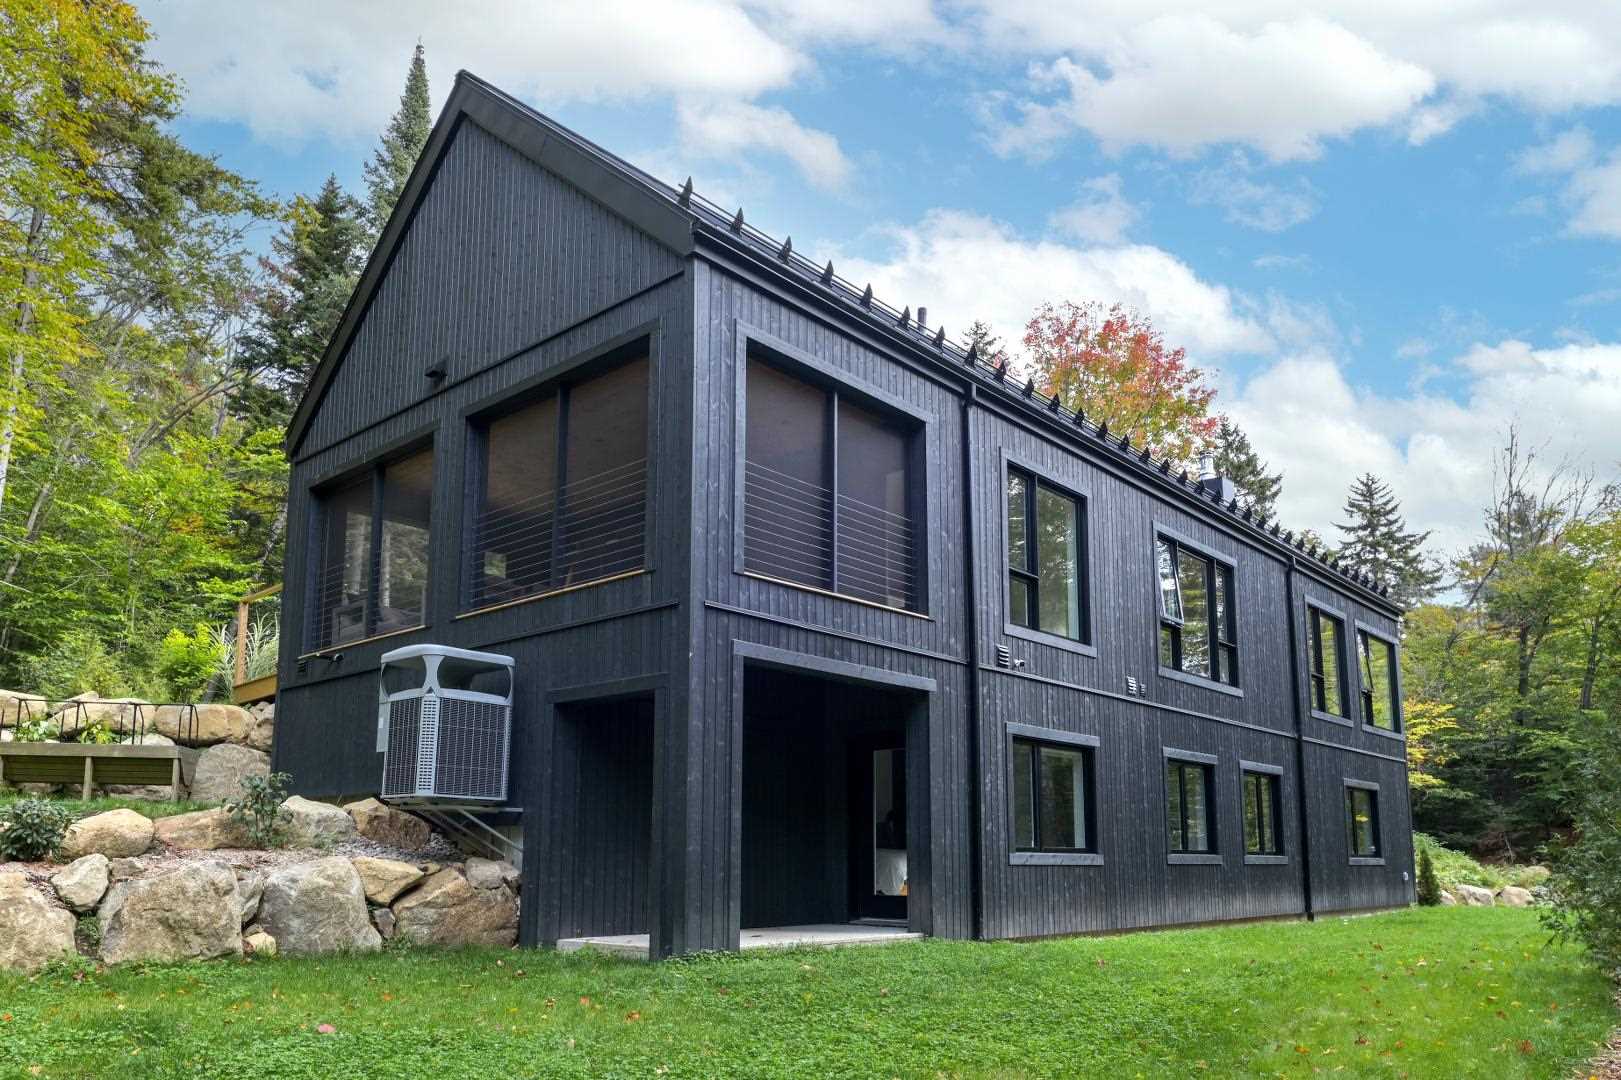 A modern home has a striking black metal and wood exterior.